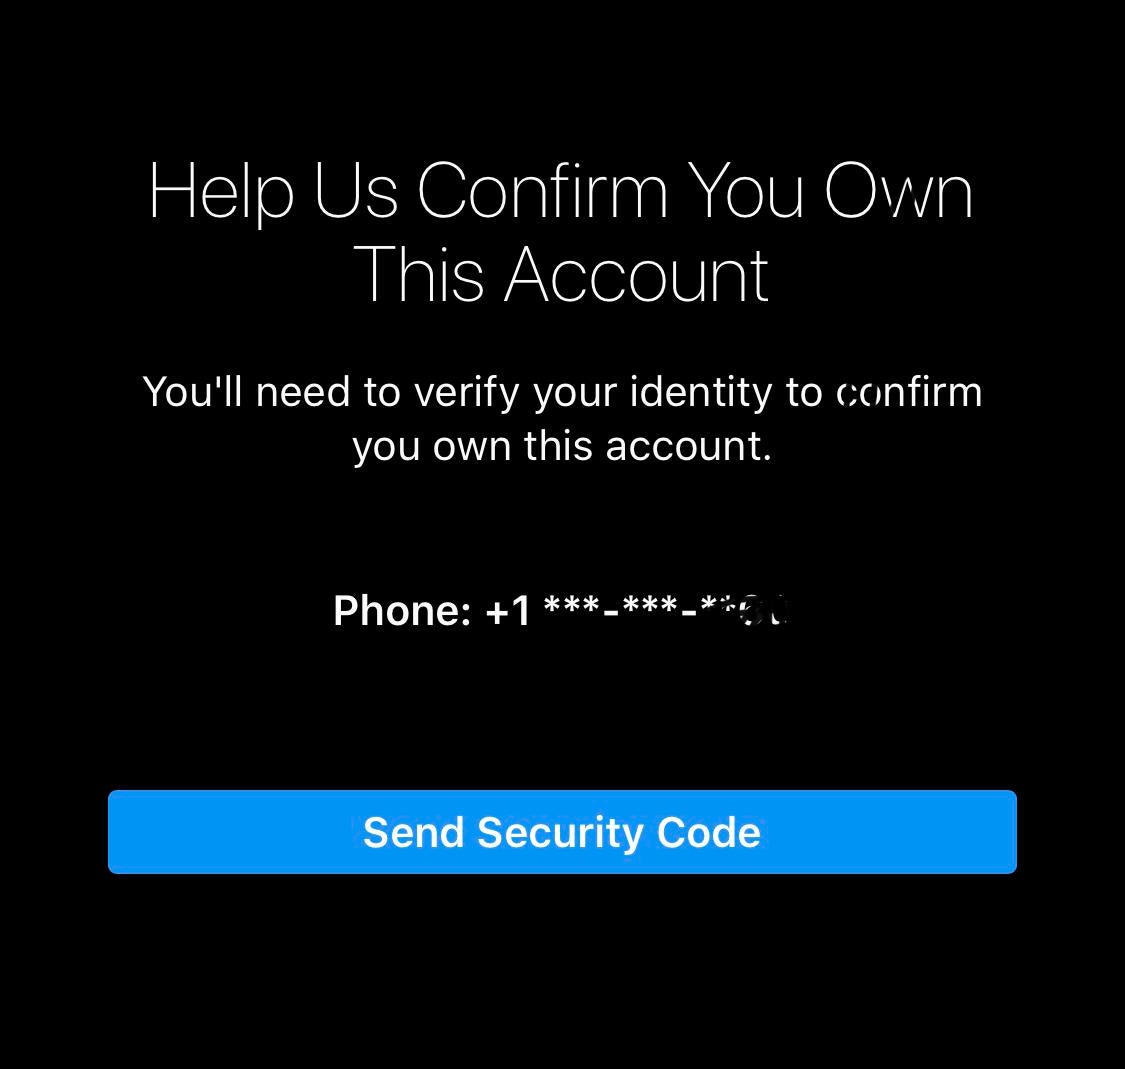 Remote.tools shows how to verify your identity on Instagram. Image source: INOSocial